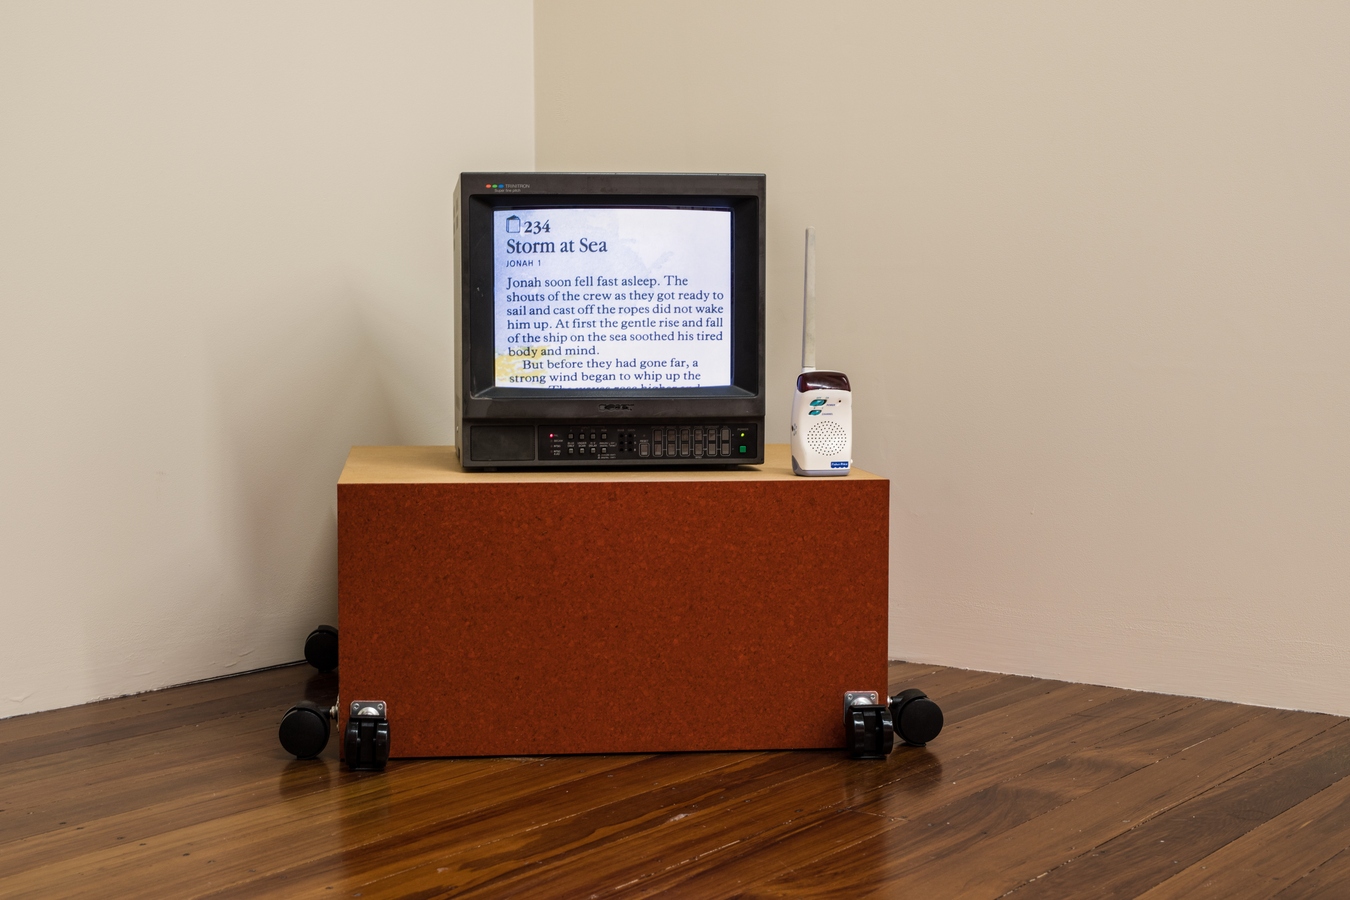 Grace Crothall, Jonah’s story (installation view), 2021, CRT TV, baby monitor, and monitor wheel plinth. Photo: Janneth Gil.